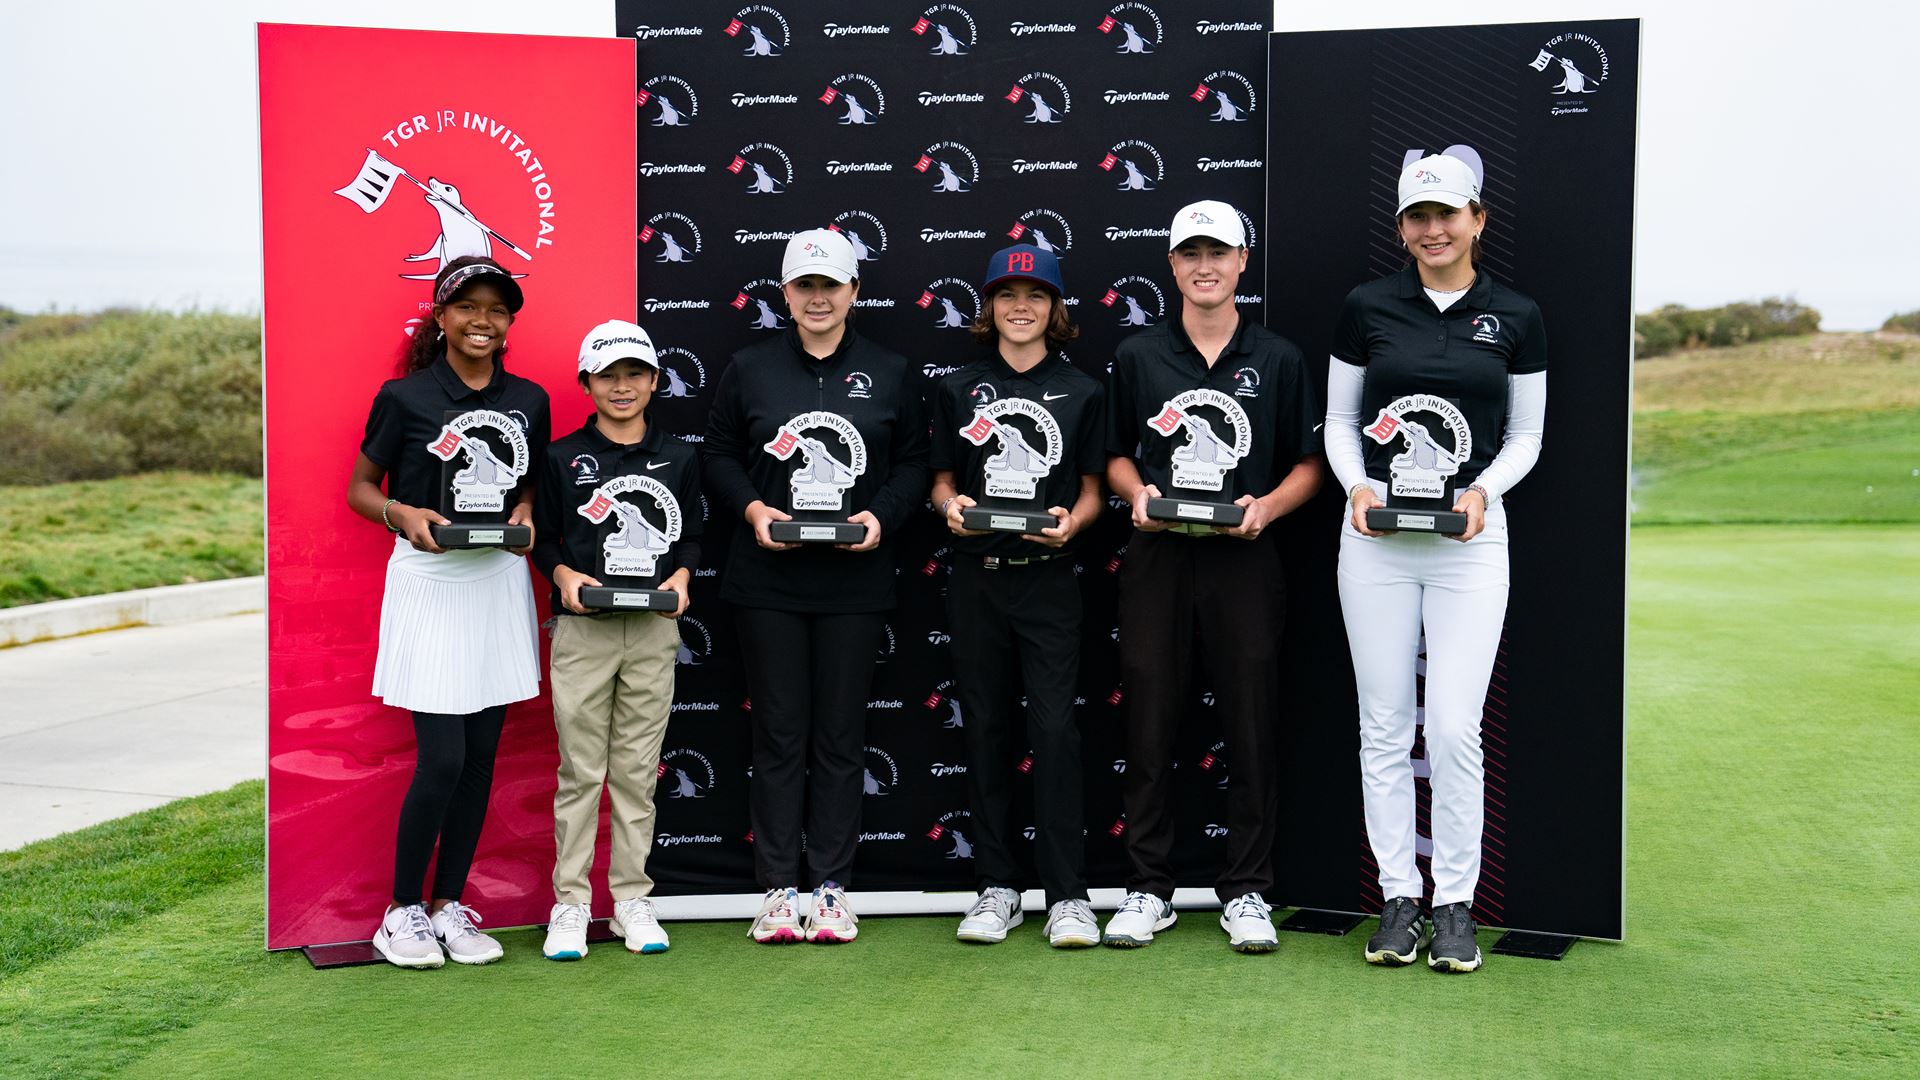 Champions Crowned at the Inaugural TGR Jr Invitational Presented by TaylorMade